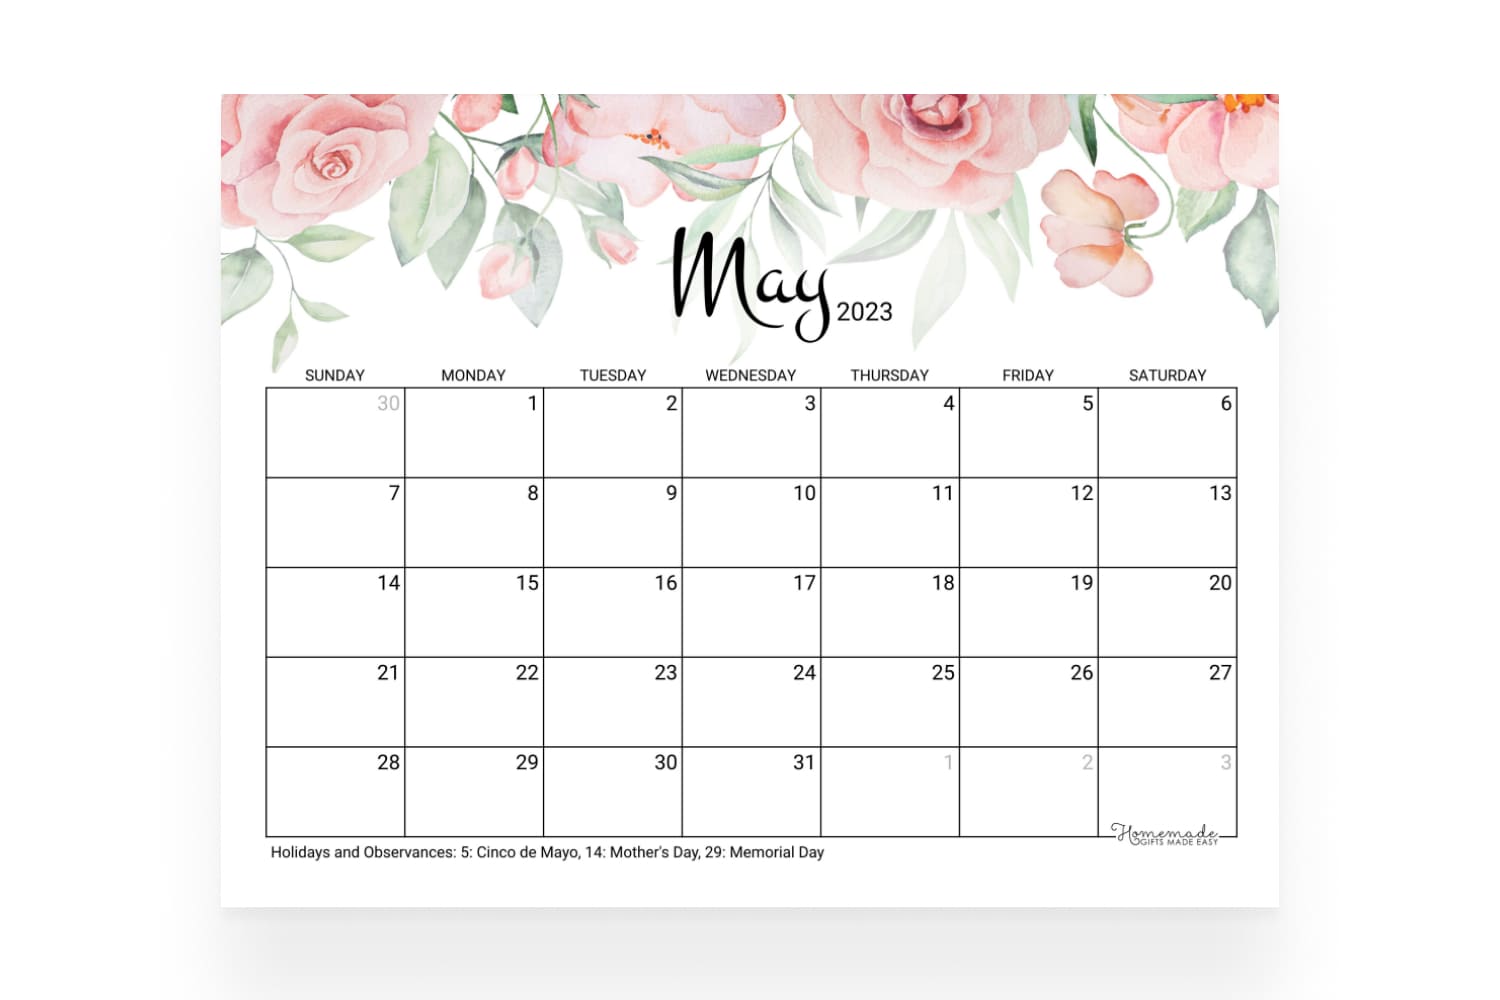 Calendar with a decorative illustrations of roses.